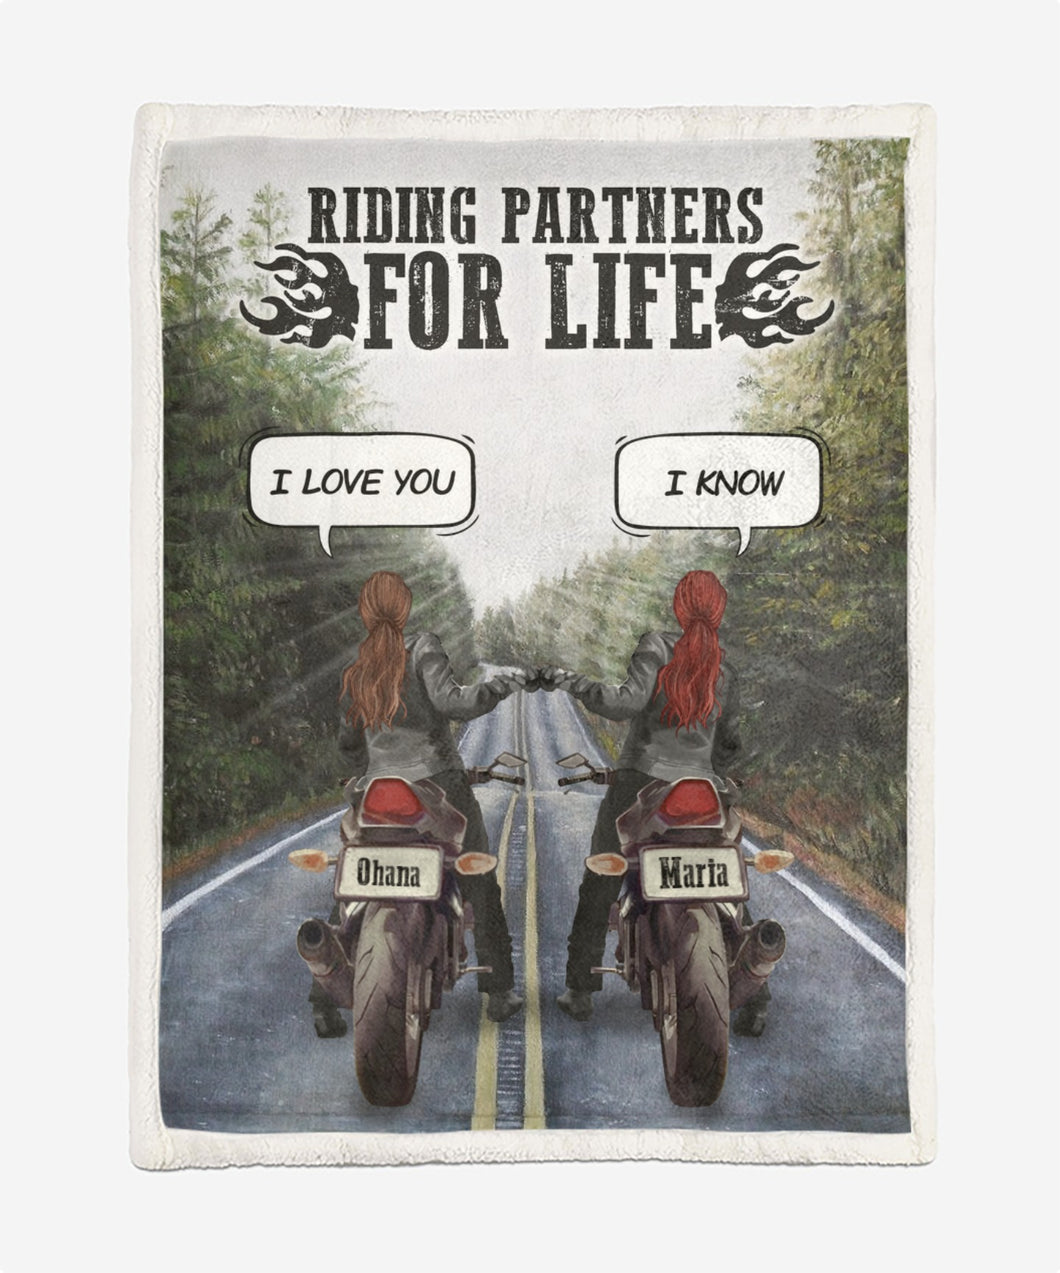 Personalized Blanket for Couple/Friends Unique gift with personalized Name/Body - 2 Women/Riding Partners for Life / Conversations